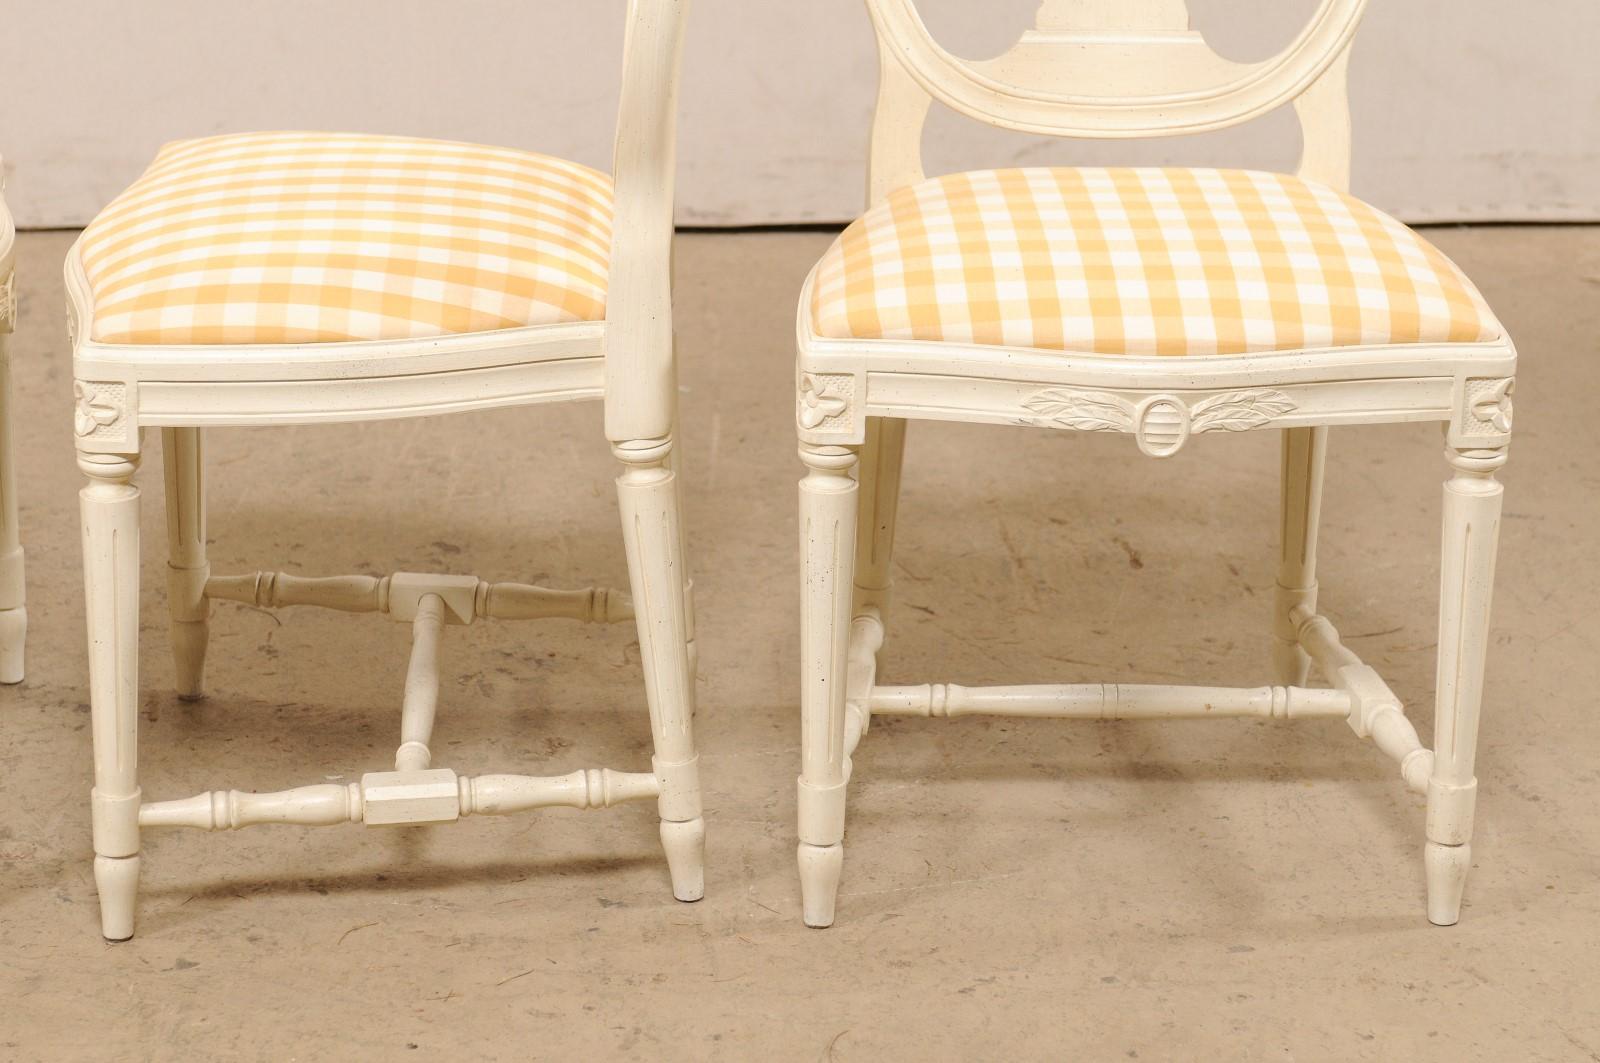 20th Century Swedish Set of 4 Side Chairs w/ Pierced Oval Shaped Backs & Upholstered Seats